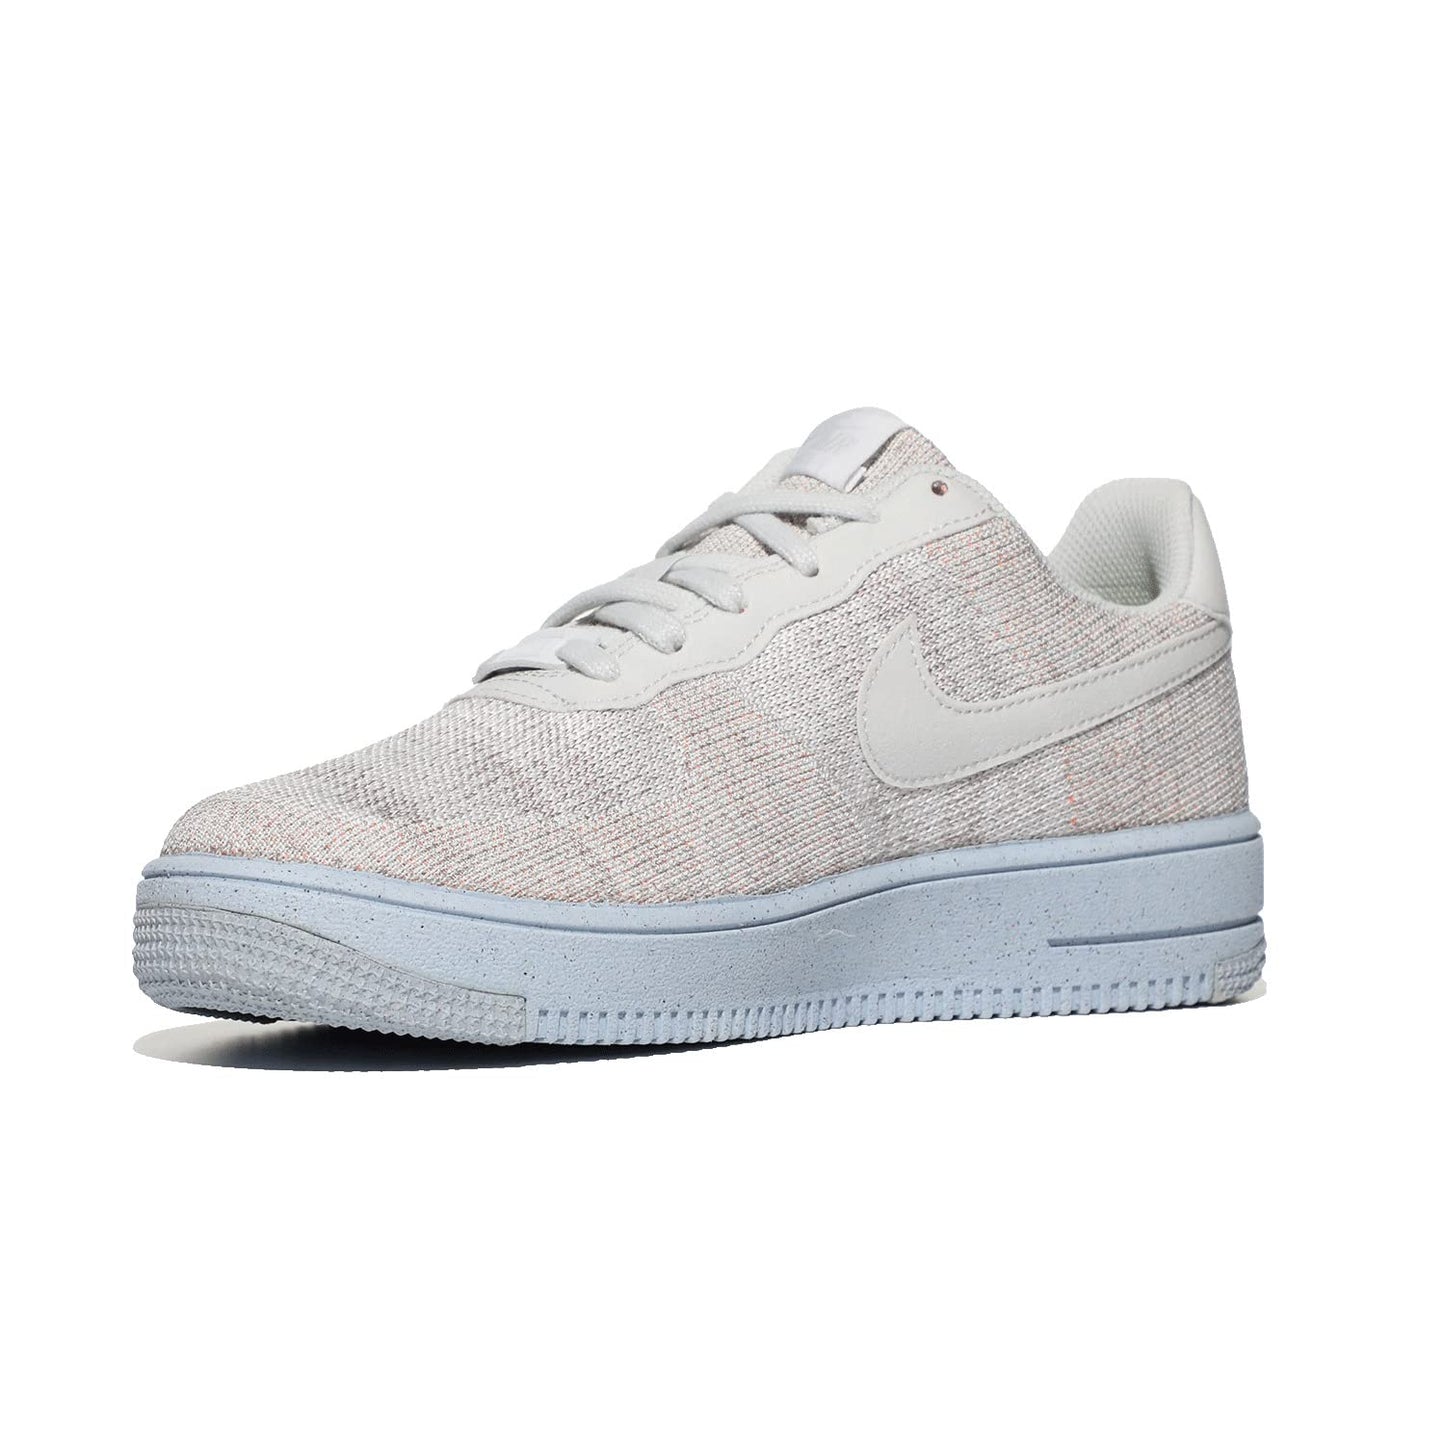 Image 2 of Air Force 1 Crater Flyknit (Big Kid)